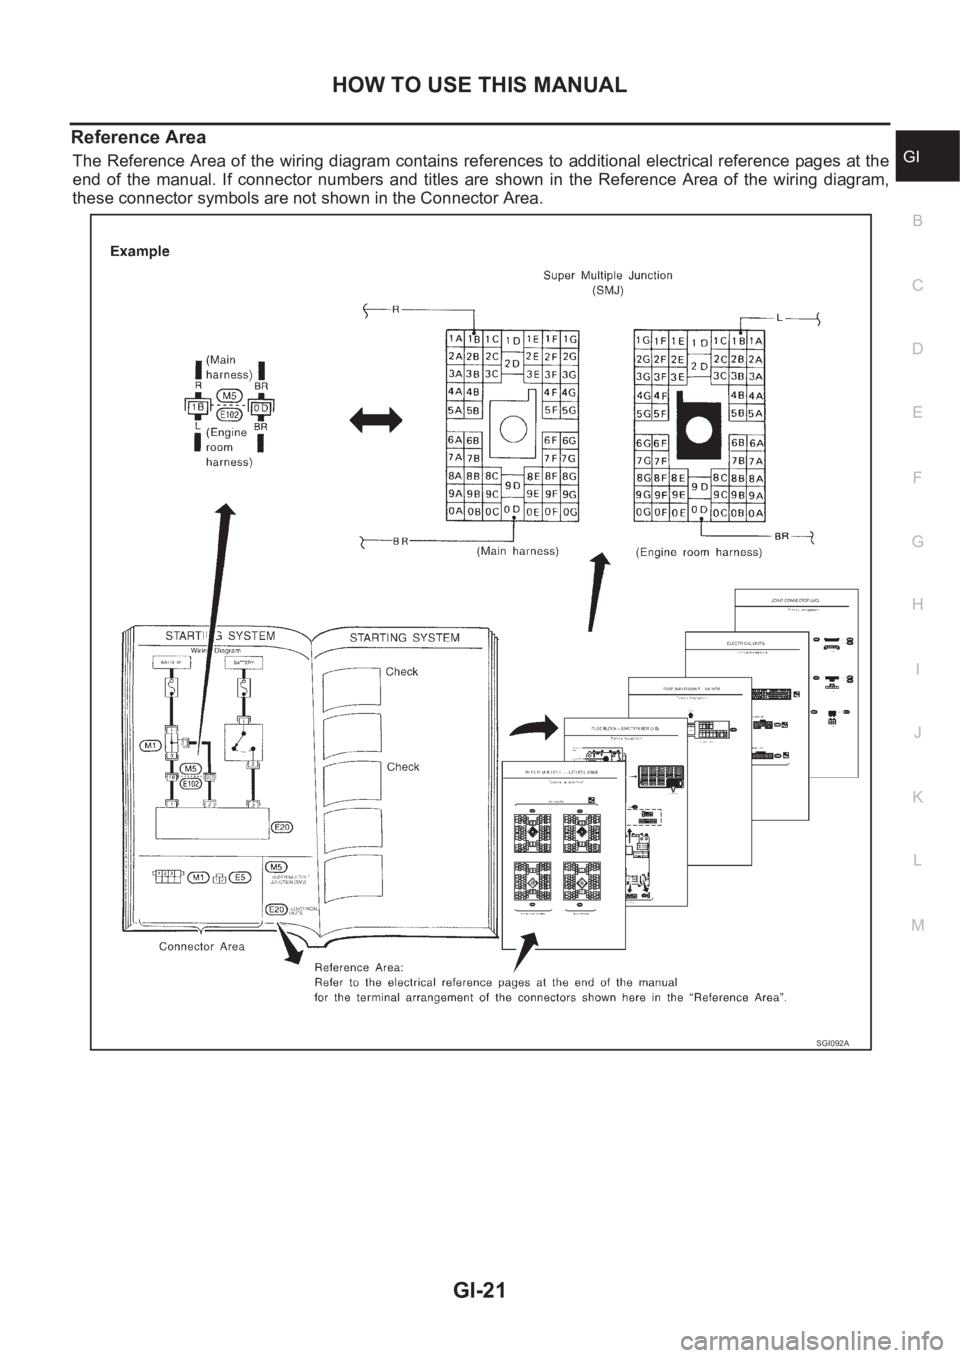 NISSAN X-TRAIL 2001  Service Repair Manual HOW TO USE THIS MANUAL
GI-21
C
D
E
F
G
H
I
J
K
L
MB
GI
Reference Area
The Reference Area of the wiring diagram contains references to additional electrical reference pages at the
end  of  the  manual.